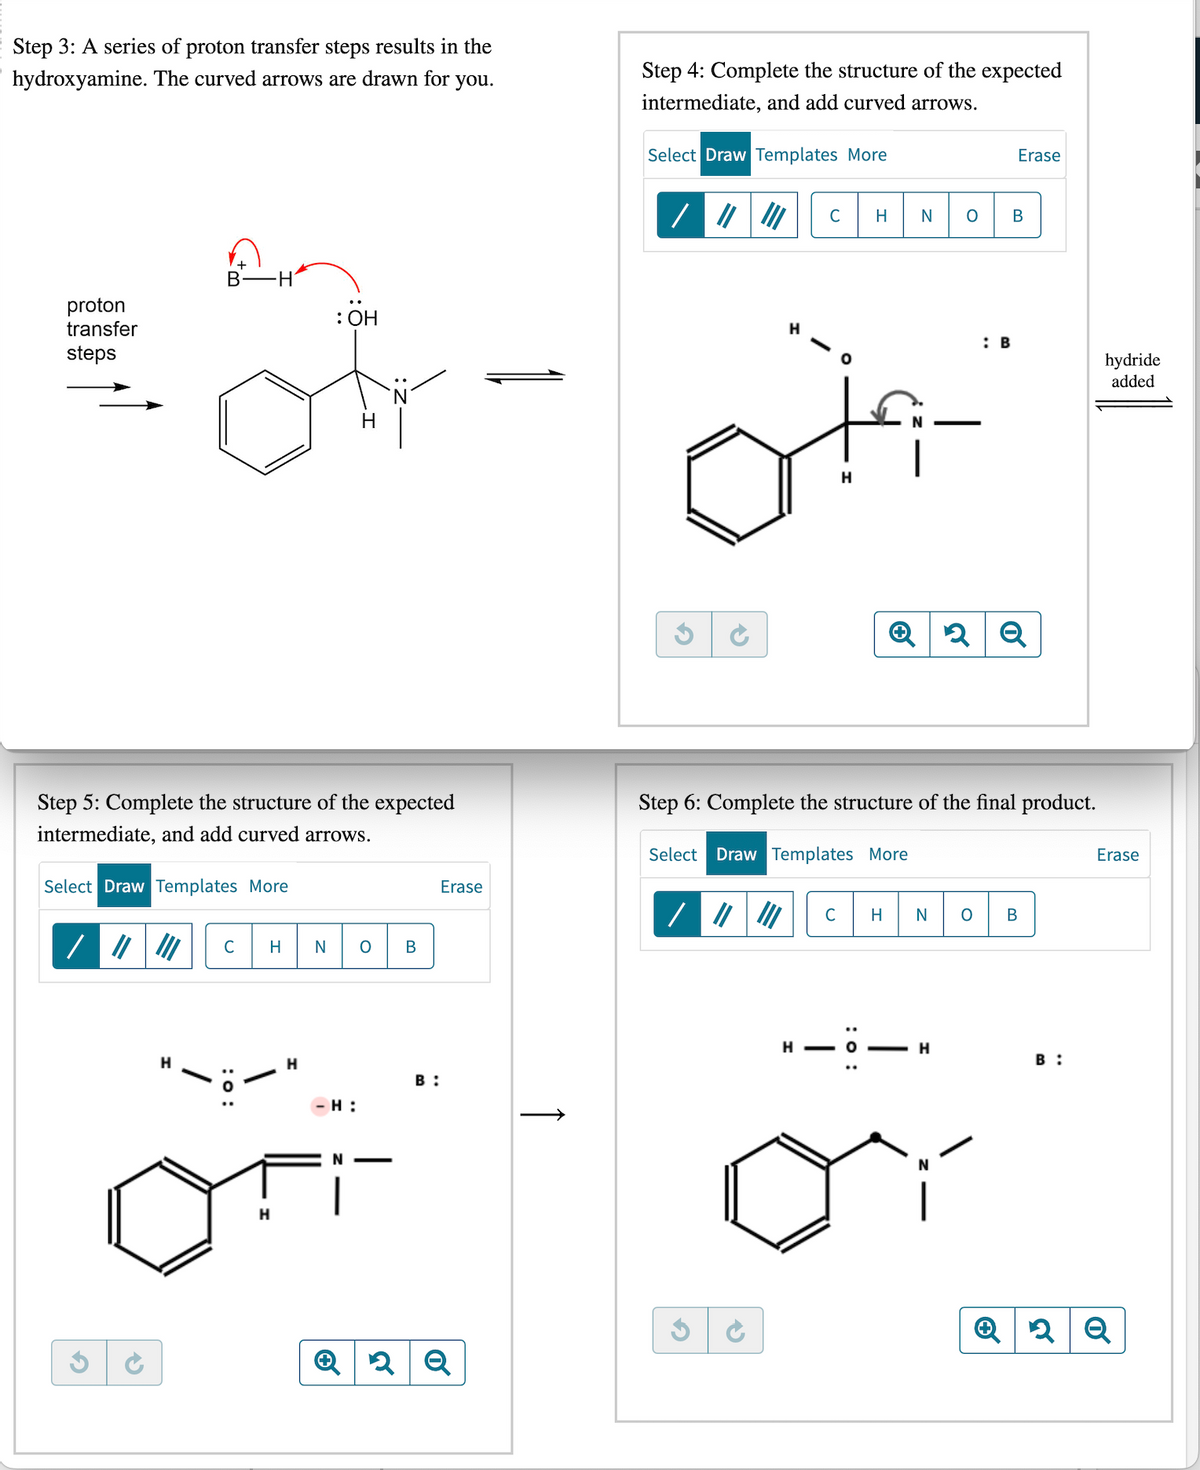 Step 3: A series of proton transfer steps results in the
hydroxyamine. The curved arrows are drawn for
you.
proton
transfer
steps
Step 5: Complete the structure of the expected
intermediate, and add curved arrows.
Select Draw Templates More
/ ||
G
B H
→
H
C H
: 0:
H
H
: OH
N
-H:
O
B
B:
Erase
Q2Q
Step 4: Complete the structure of the expected
intermediate, and add curved arrows.
Select Draw Templates More
G
on
H
C H
G
H
N
:0
O
Step 6: Complete the structure of the final product.
Select Draw Templates More
— H
N
Erase
B
: B
C HNO B
2 Q
B:
hydride
added
Erase
2 Q